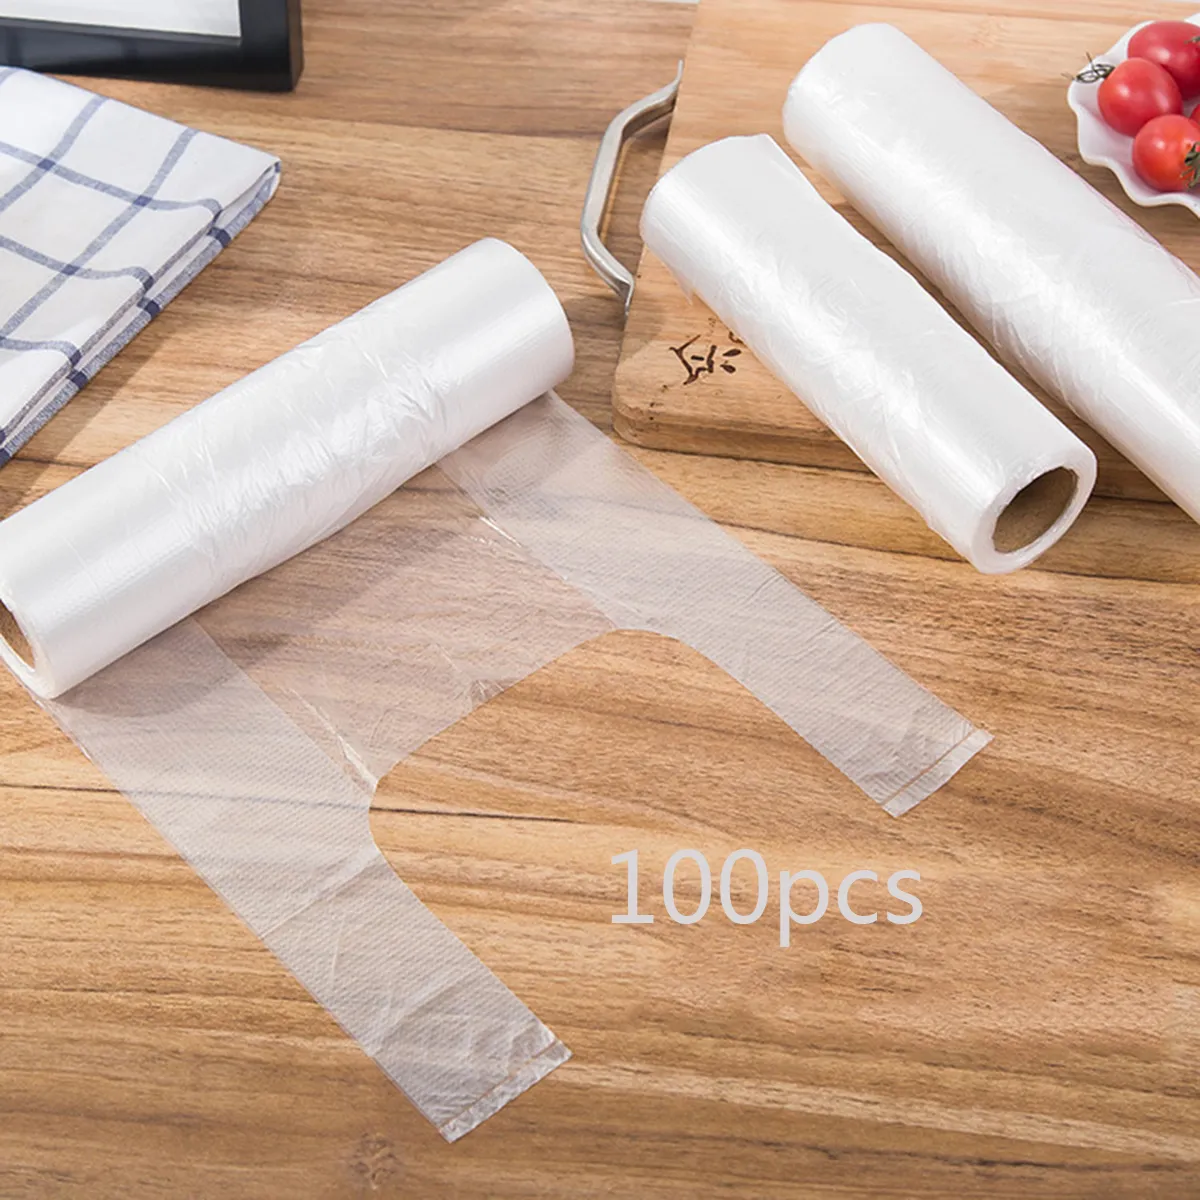 100-pack Food and Fridge Freezer Bags Rolls Clear Plastic Bag Disposable Thickened Vest-style Fresh-keeping Bag with Tie Handles  big image 1